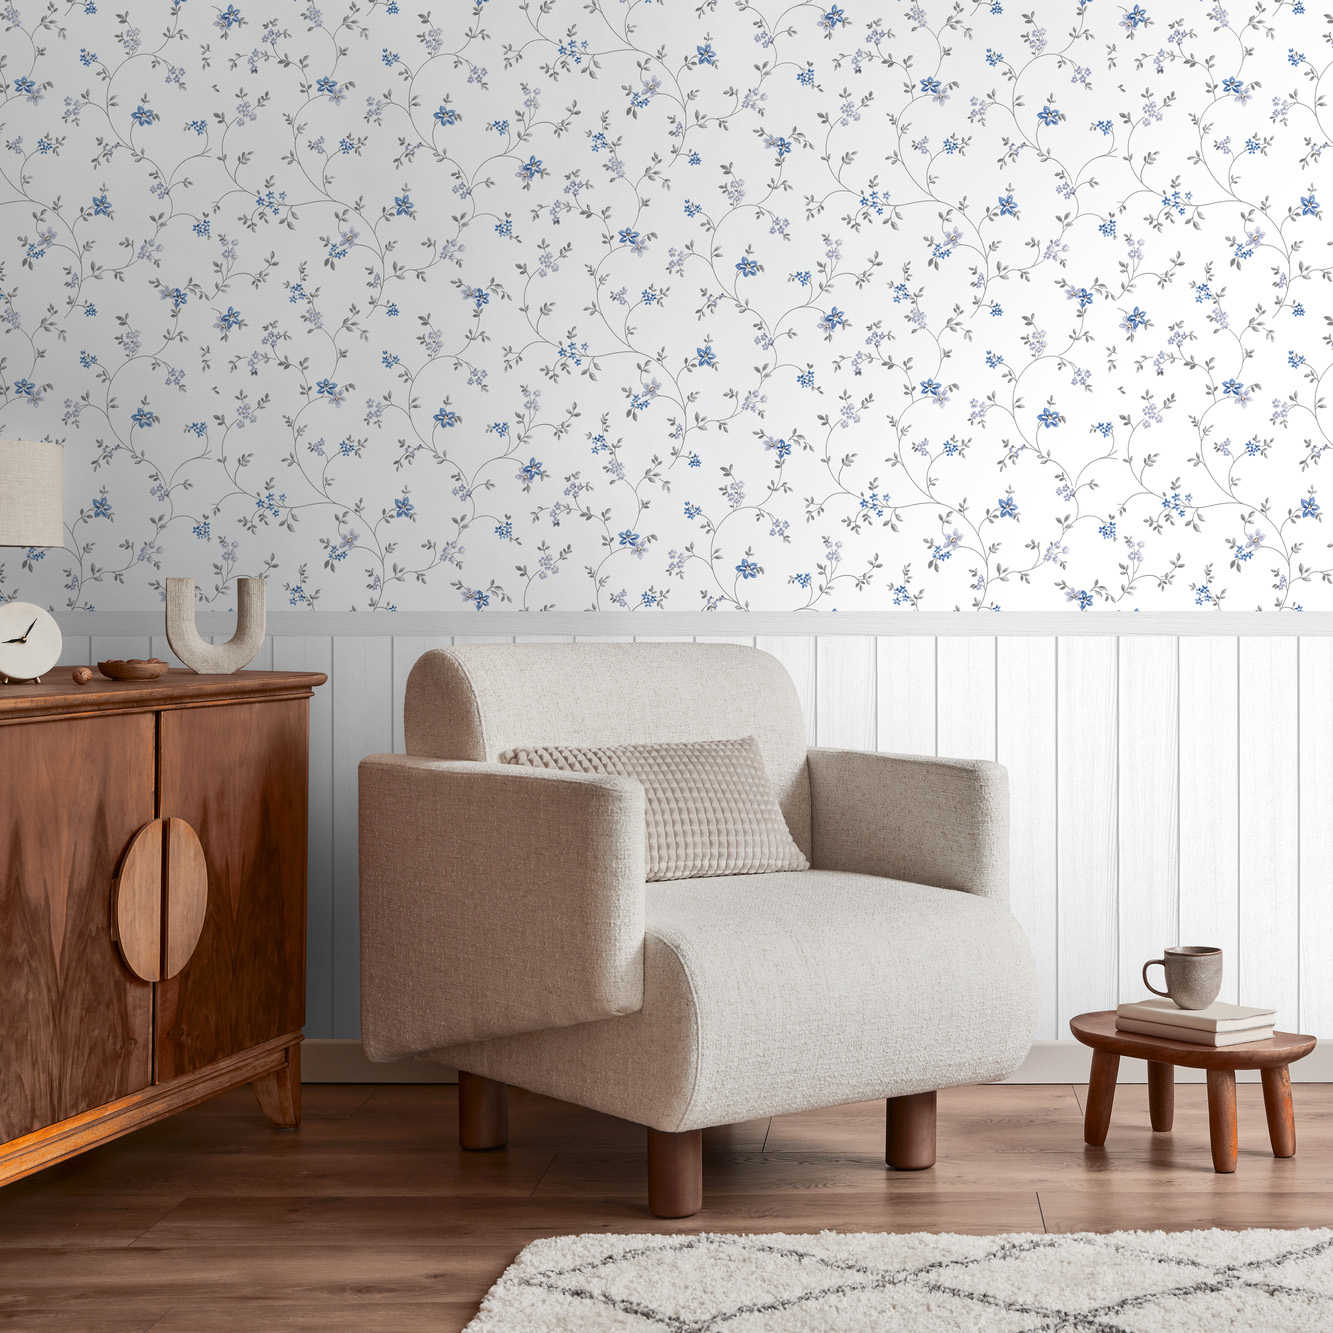 Non-woven motif wallpaper with wood-effect plinth border and floral pattern - white, grey, blue
